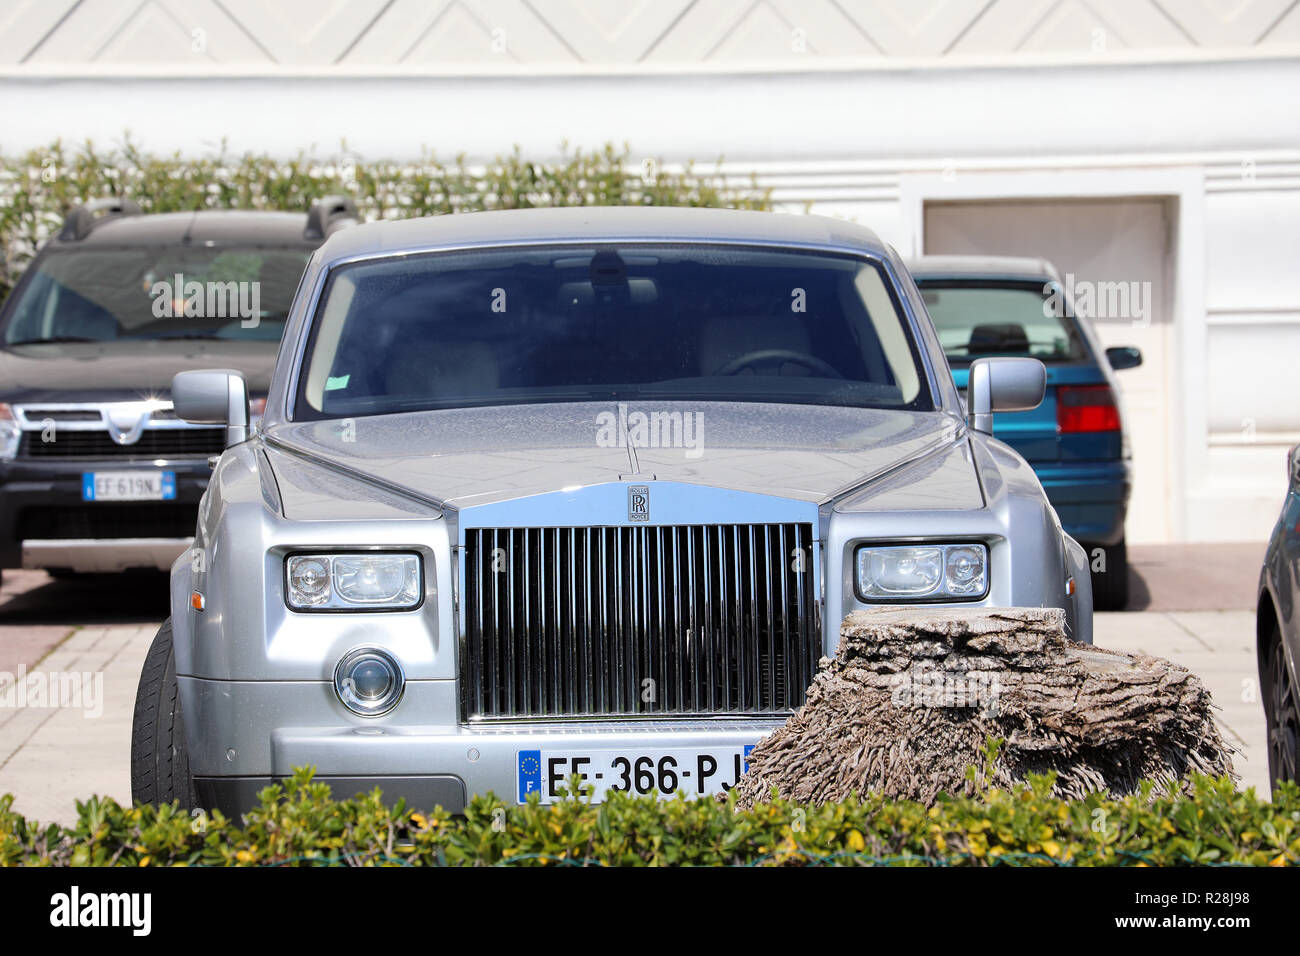 Menton, France - April 5, 2018: Luxury Rolls-Royce Phantom (Front View) Parked In The Street of Menton, French Riviera, Europe Stock Photo